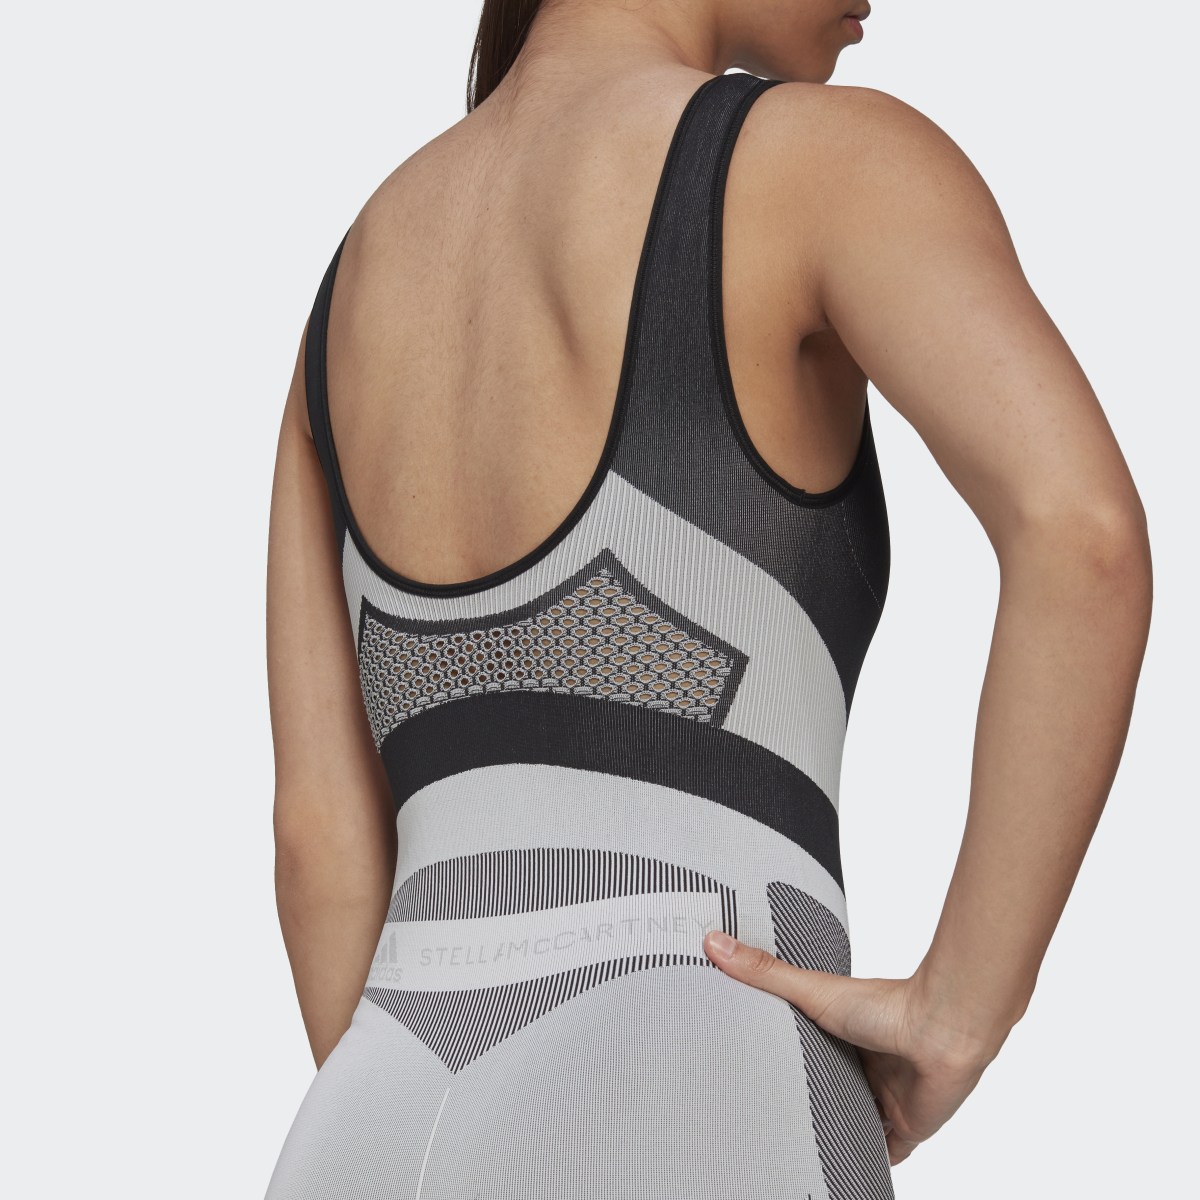 Adidas by Stella McCartney TrueStrength Seamless Training All-in-One Suit. 7